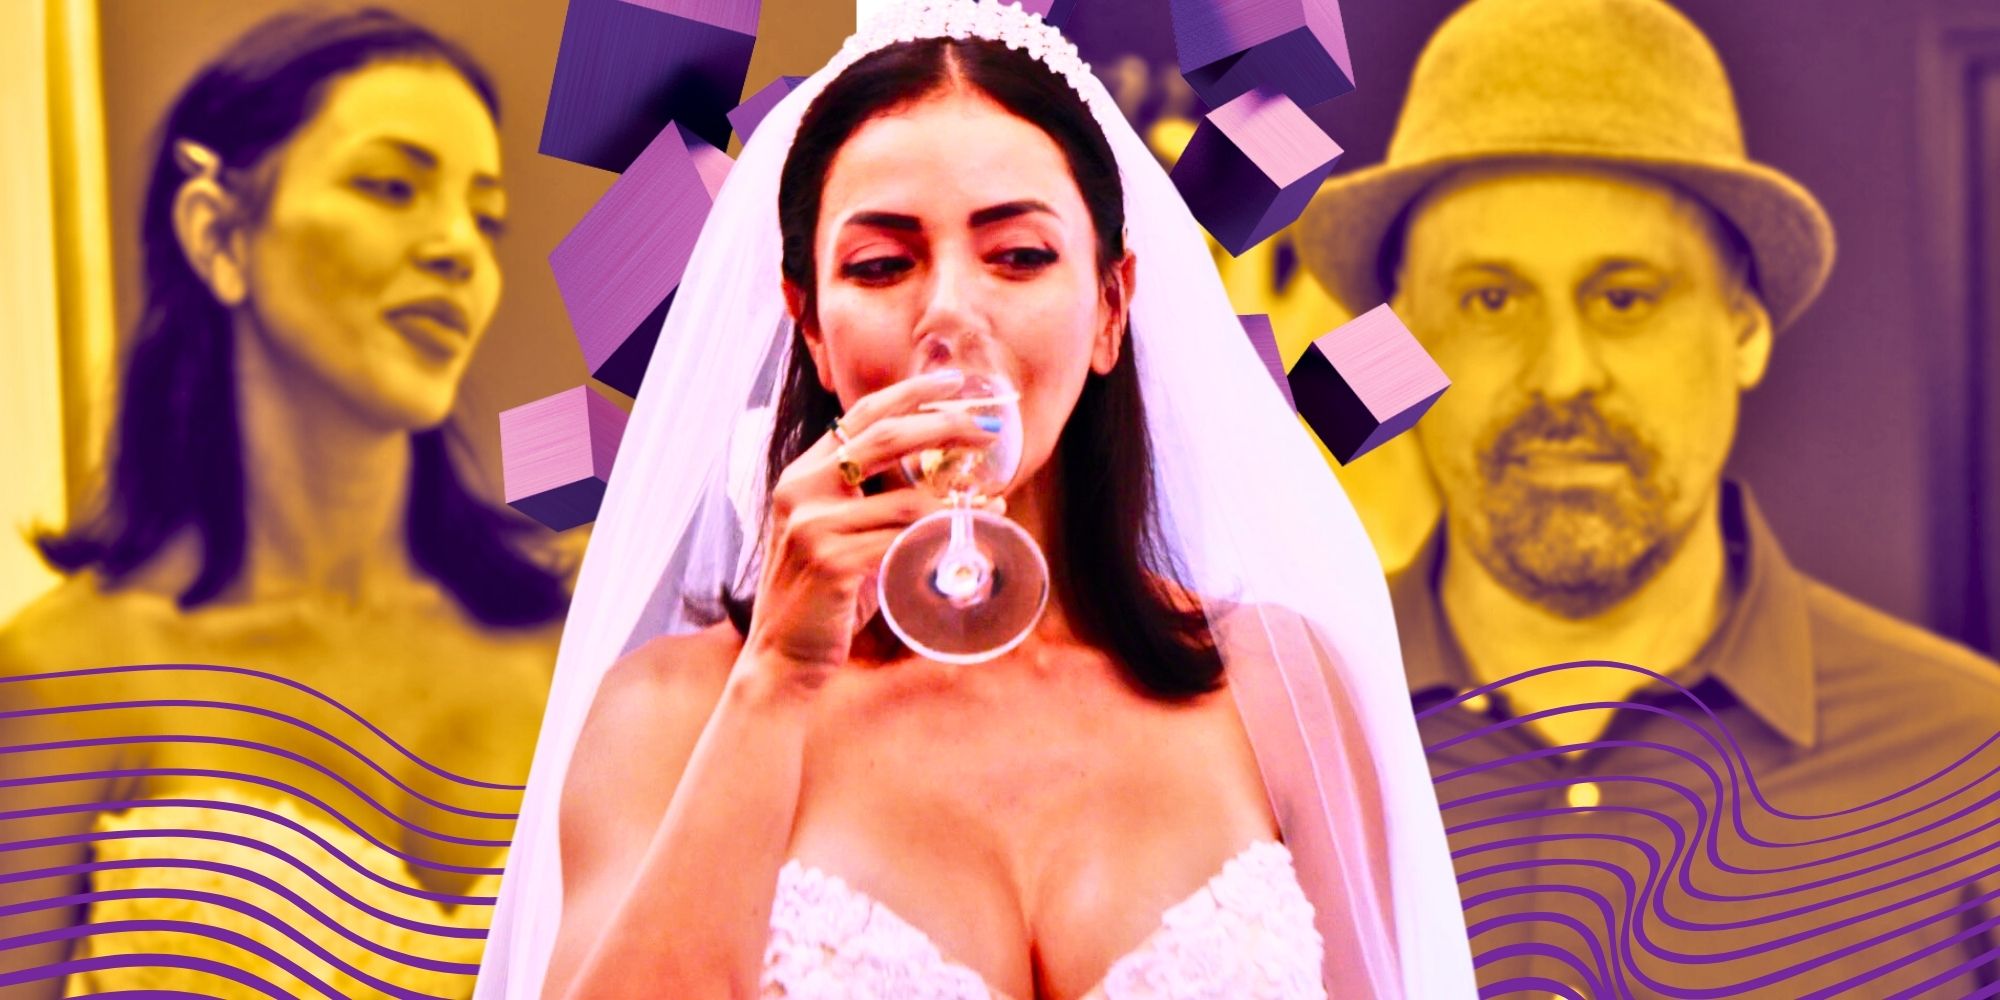 90 day fiance jasmine in a wedding dress drinking champagne with a Gino montage behind her